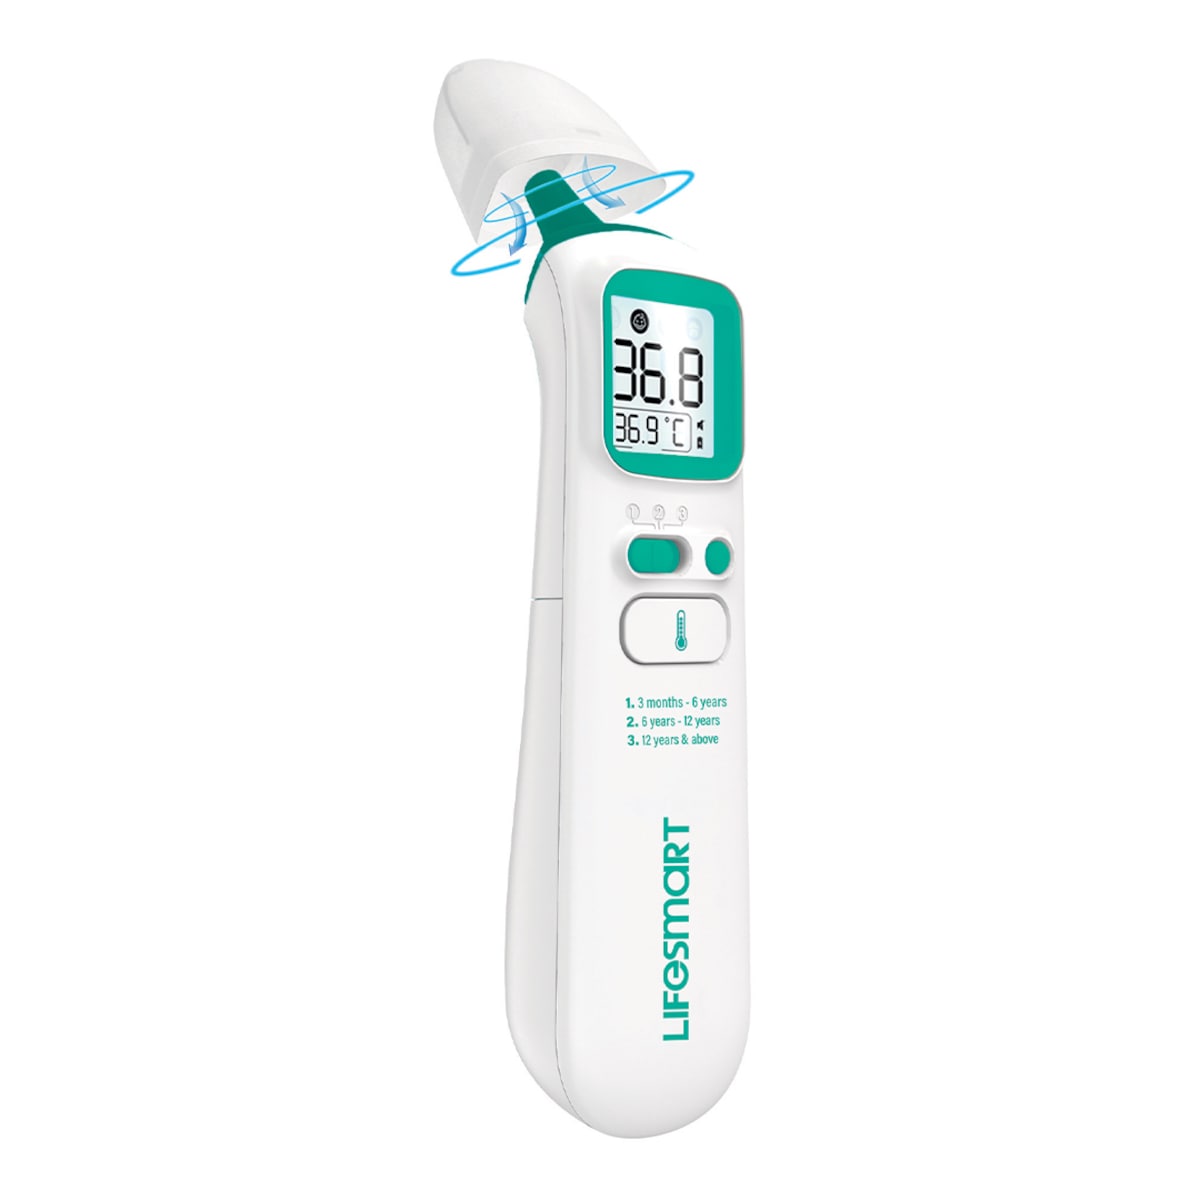 Lifesmart Infrared Dual Function Thermometer